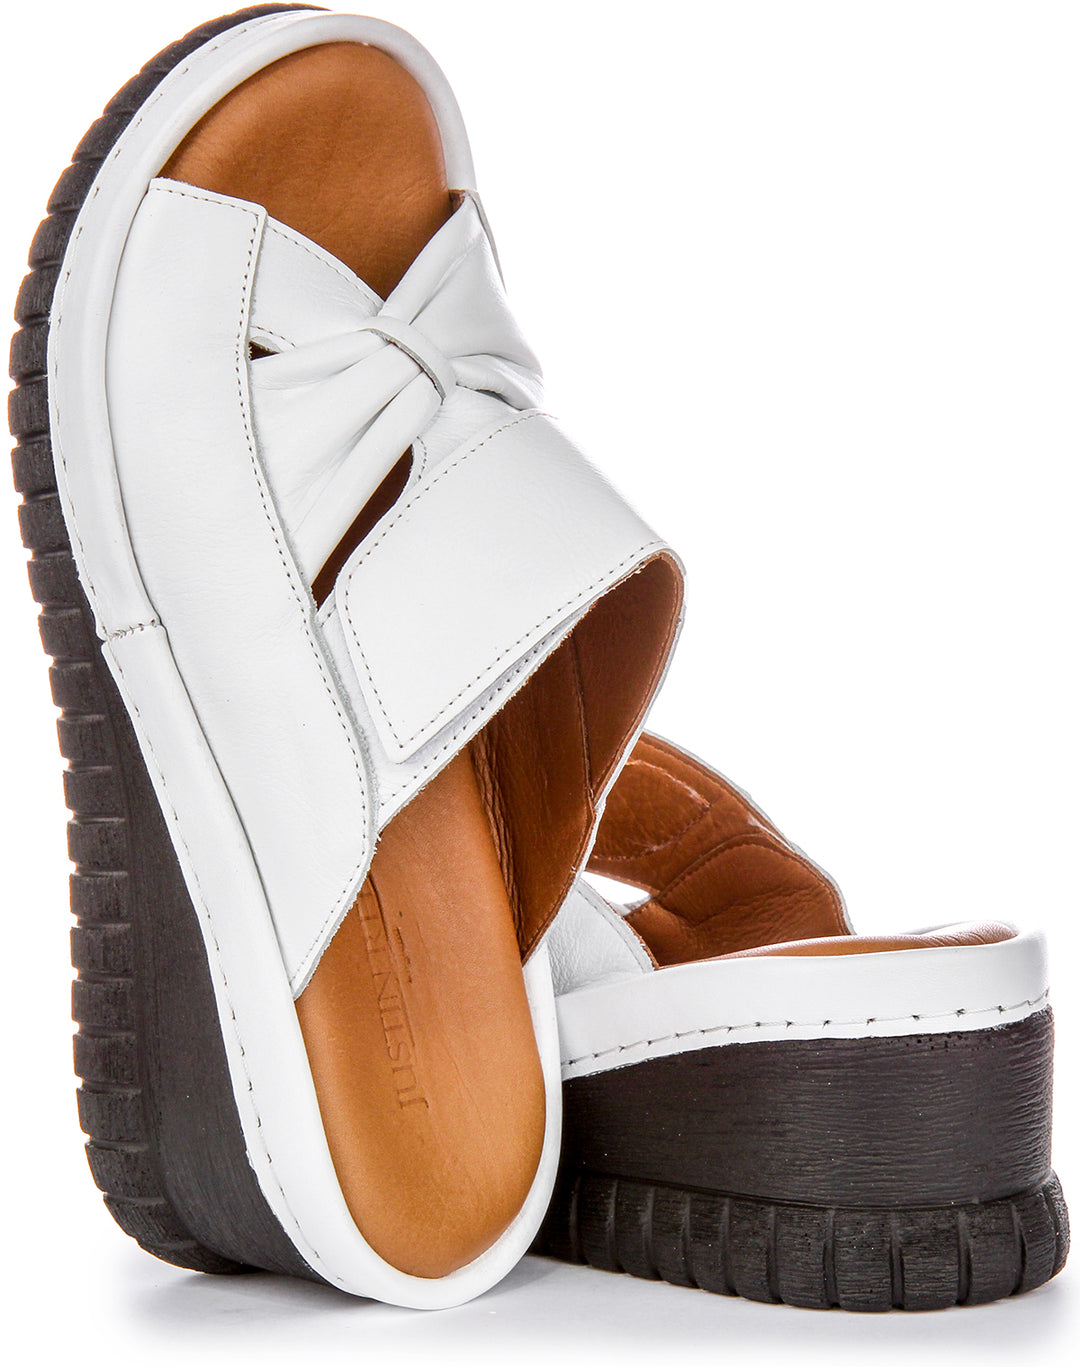 Justinreess England Sloane Soft Footbed In White For Women